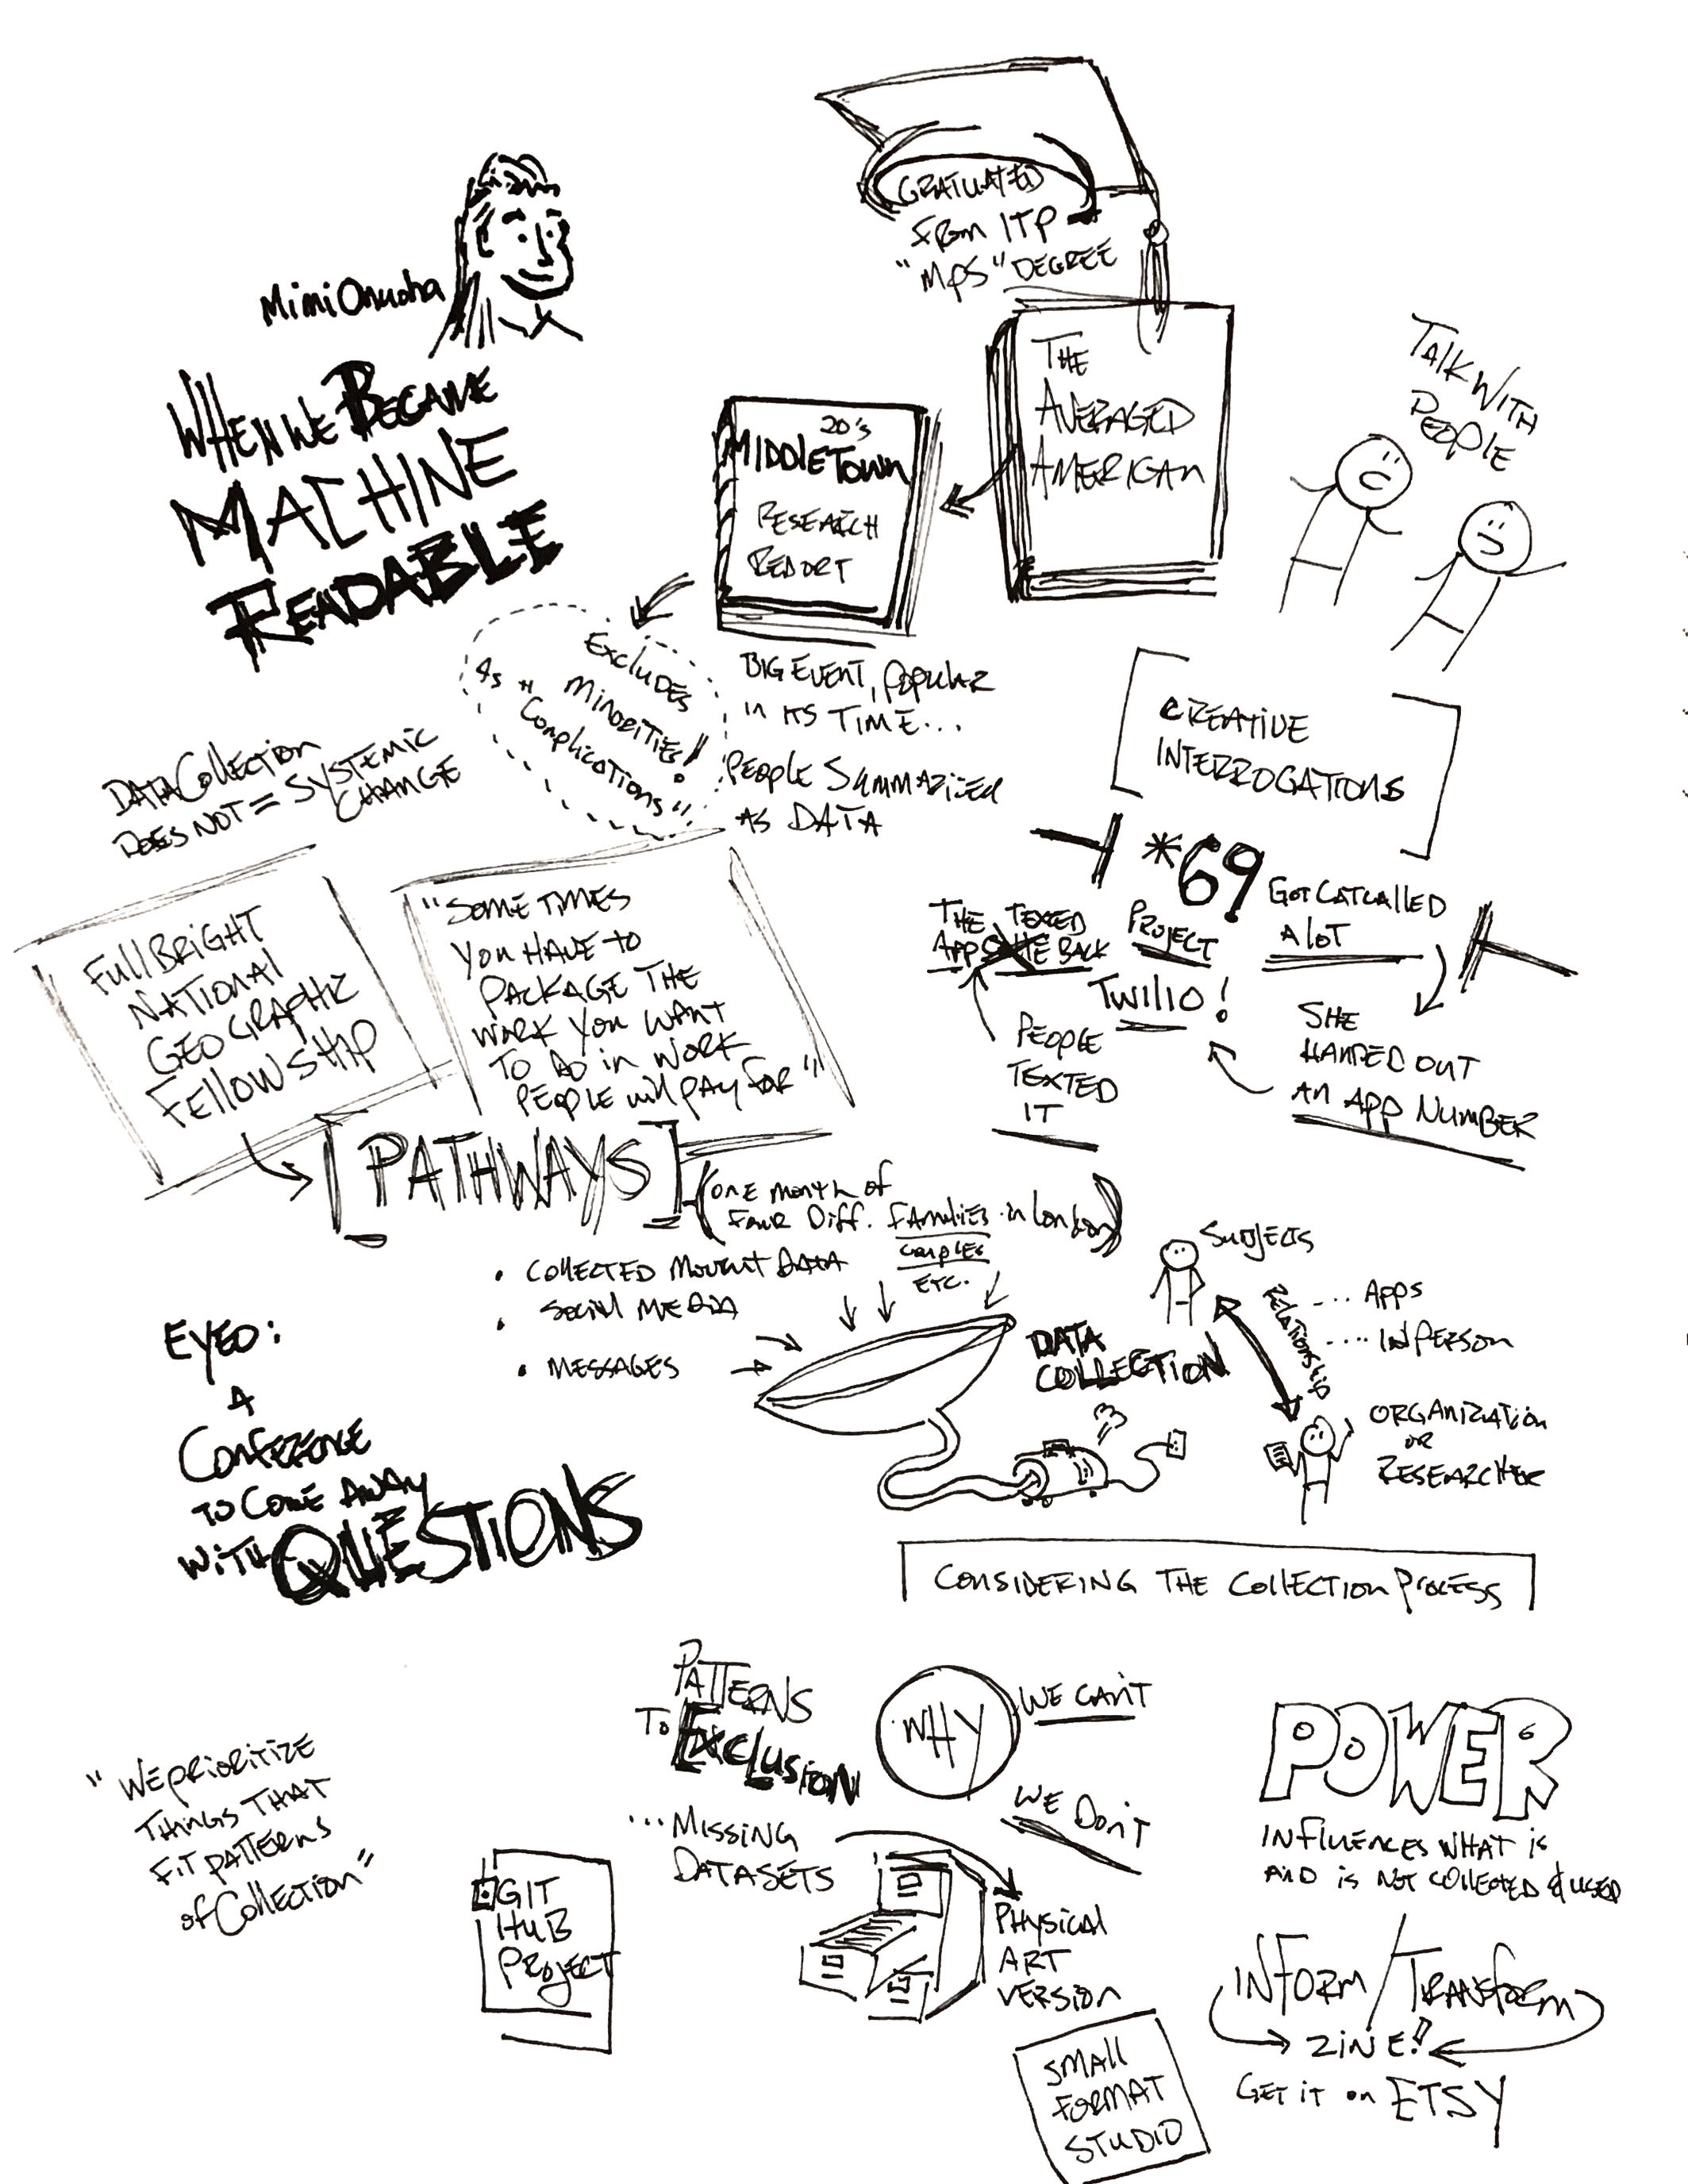 3 - Mimi Onuoha - When We Became Machine Readable.png